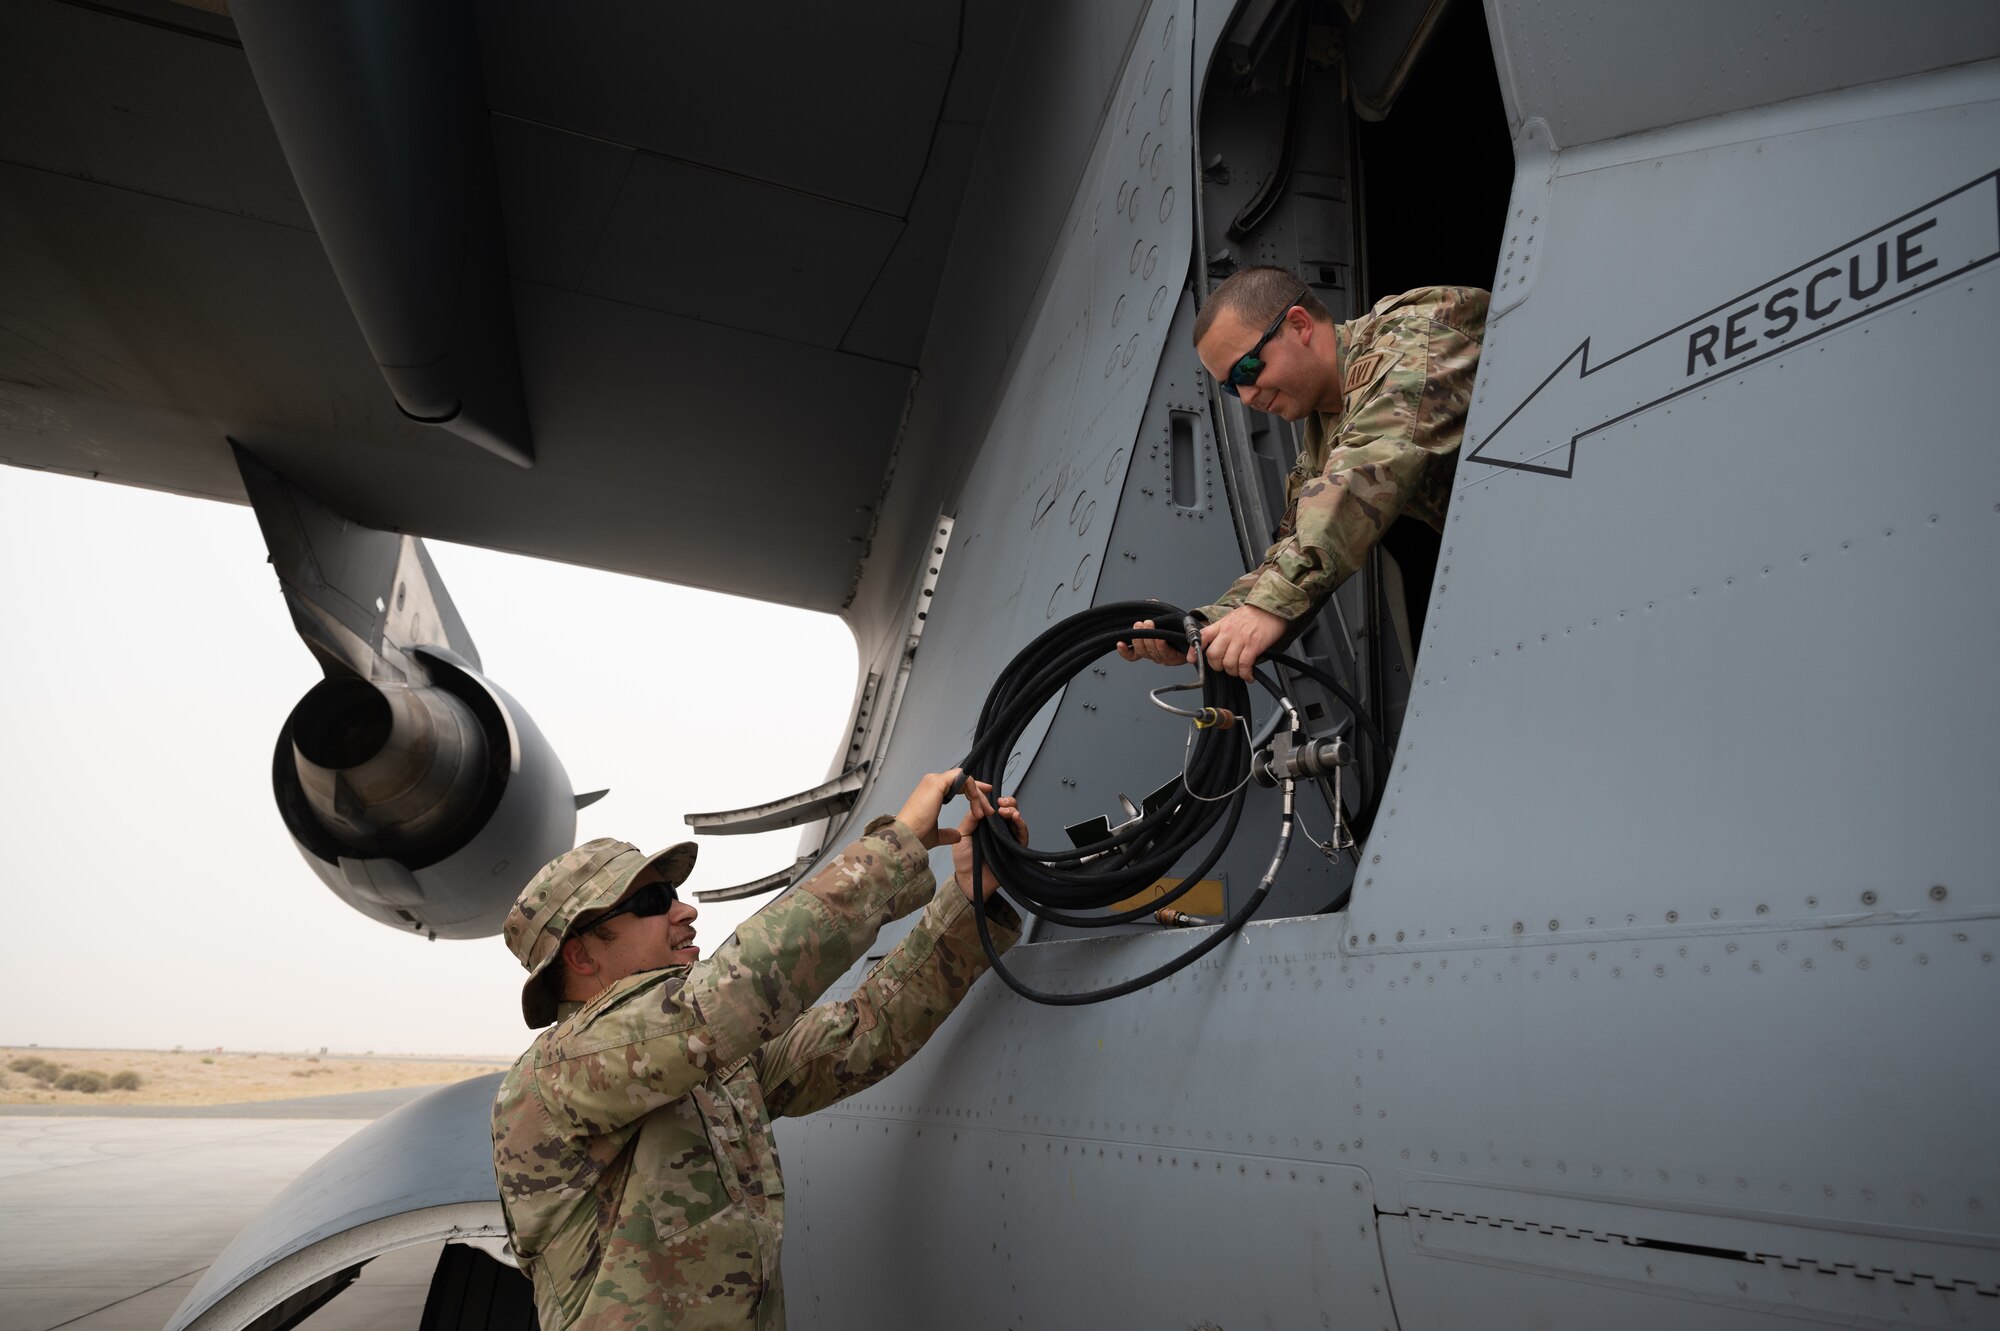 Since 2011, the Jokers assigned to the 5th 5th Expeditionary Air Mobility Squadron work with the host installation and Louis Berger Aircraft Services contract partners to provide en route C-17 Globemaster III aircraft maintenance at Ali Al Salem Air Base and aerial port operations, command and control and C-5 Galaxy and C-17 aircraft maintenance at Abdullah al Mubarak Air Base, also known as Cargo City.